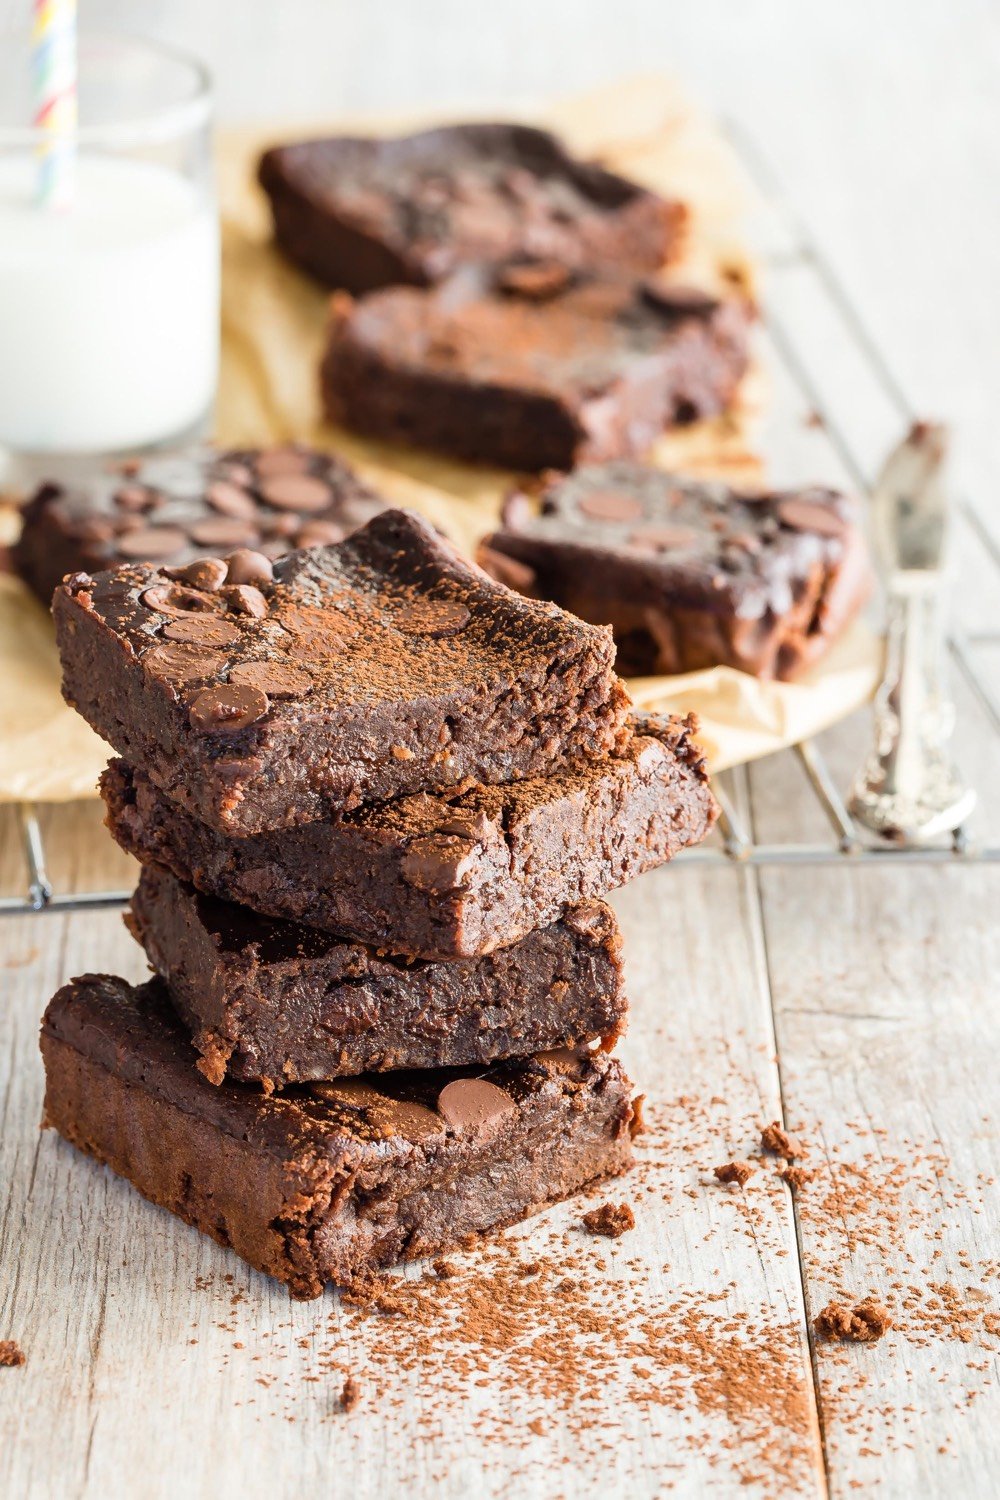 Gluten Free Double Chocolate Black Bean Brownies from weelicious.com